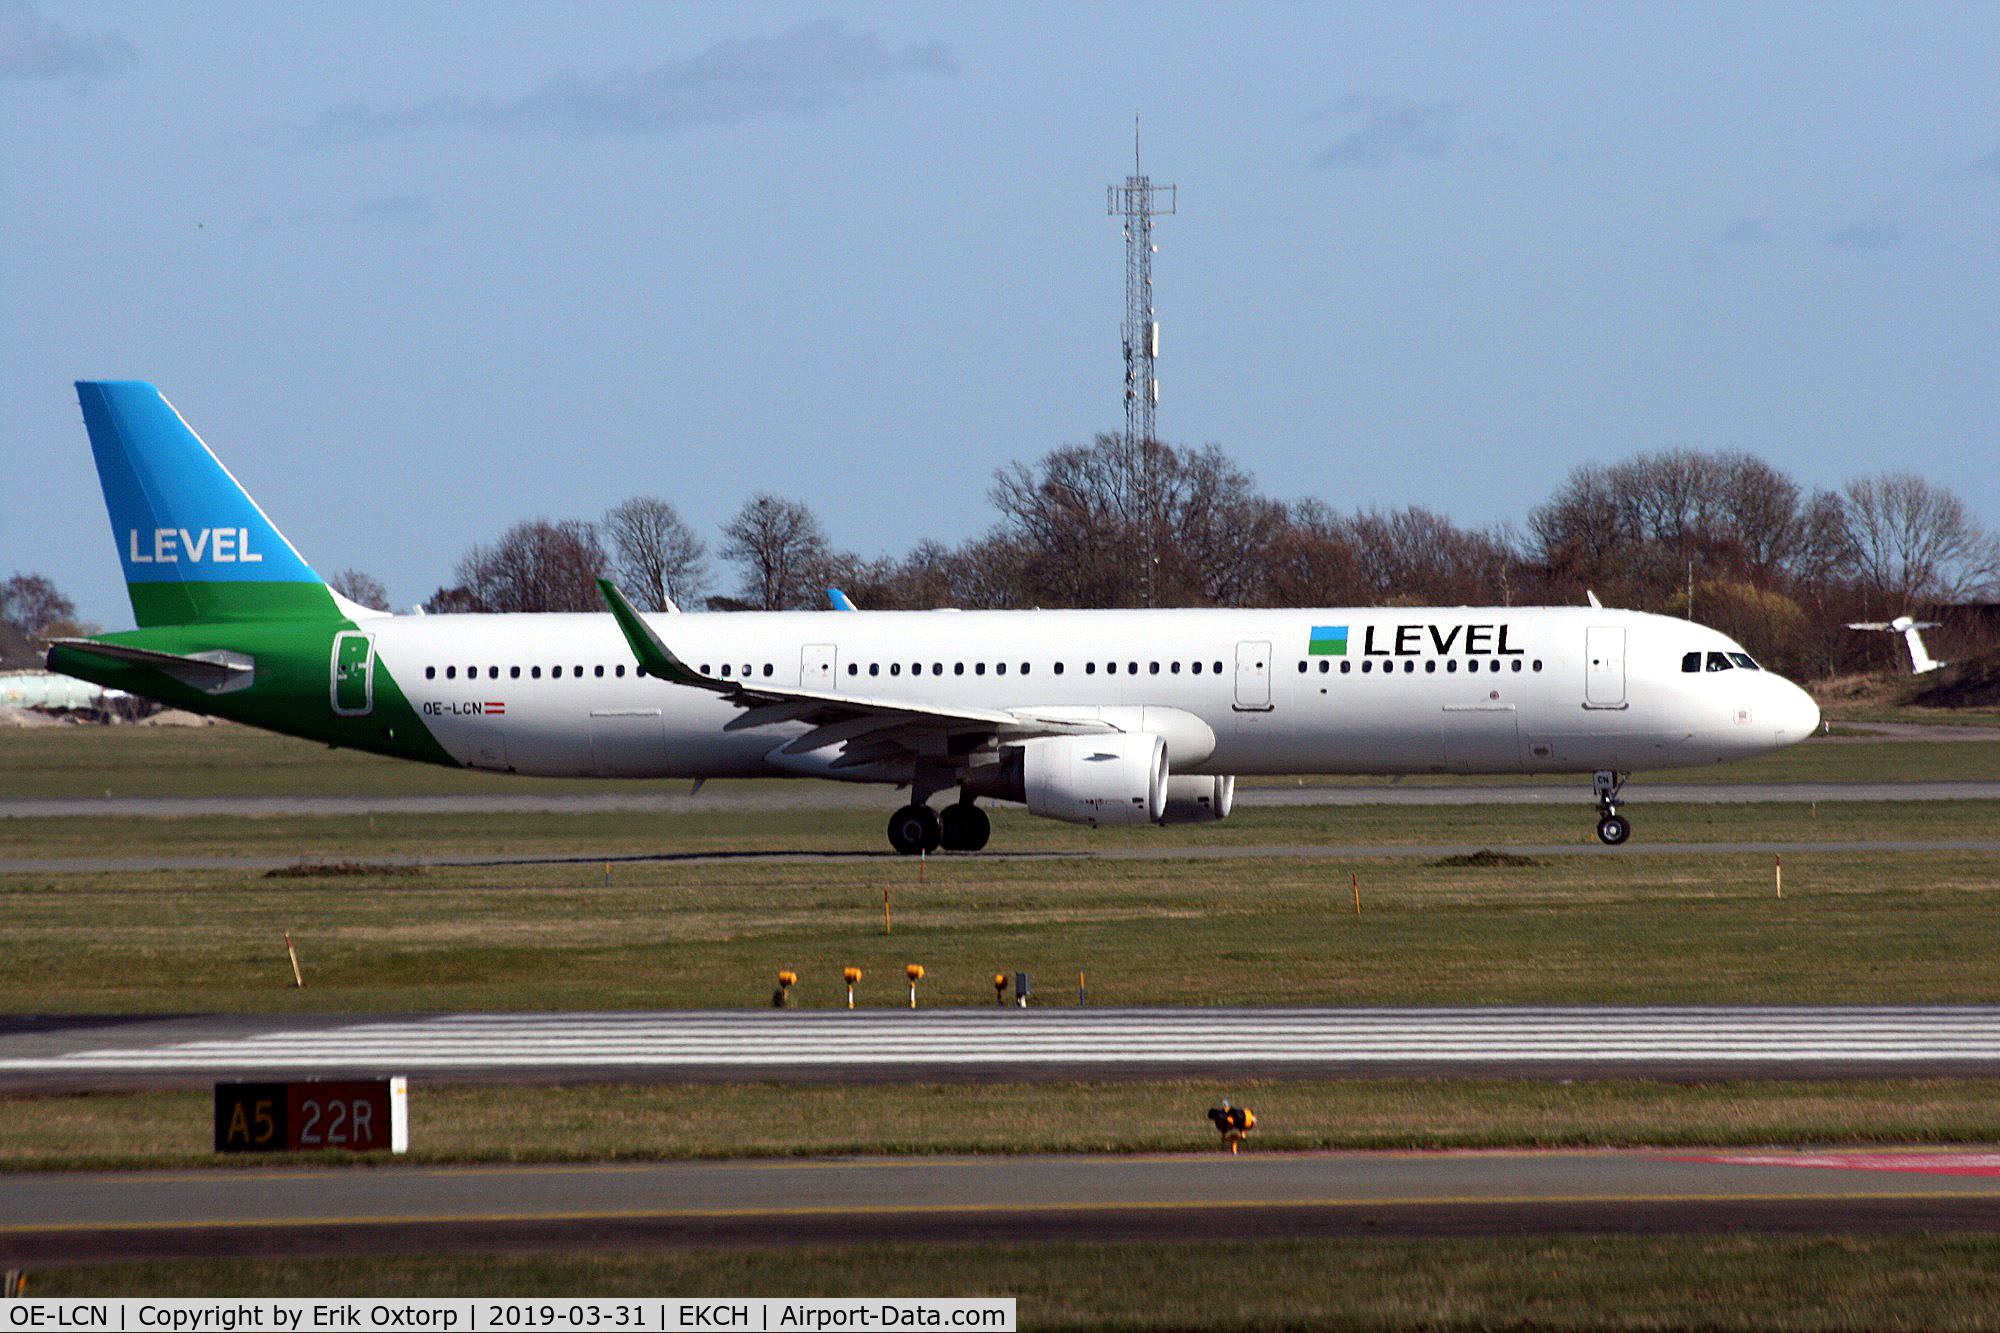 OE-LCN, 2015 Airbus A321-211 C/N 6454, OE-LCN taxi for takeoff